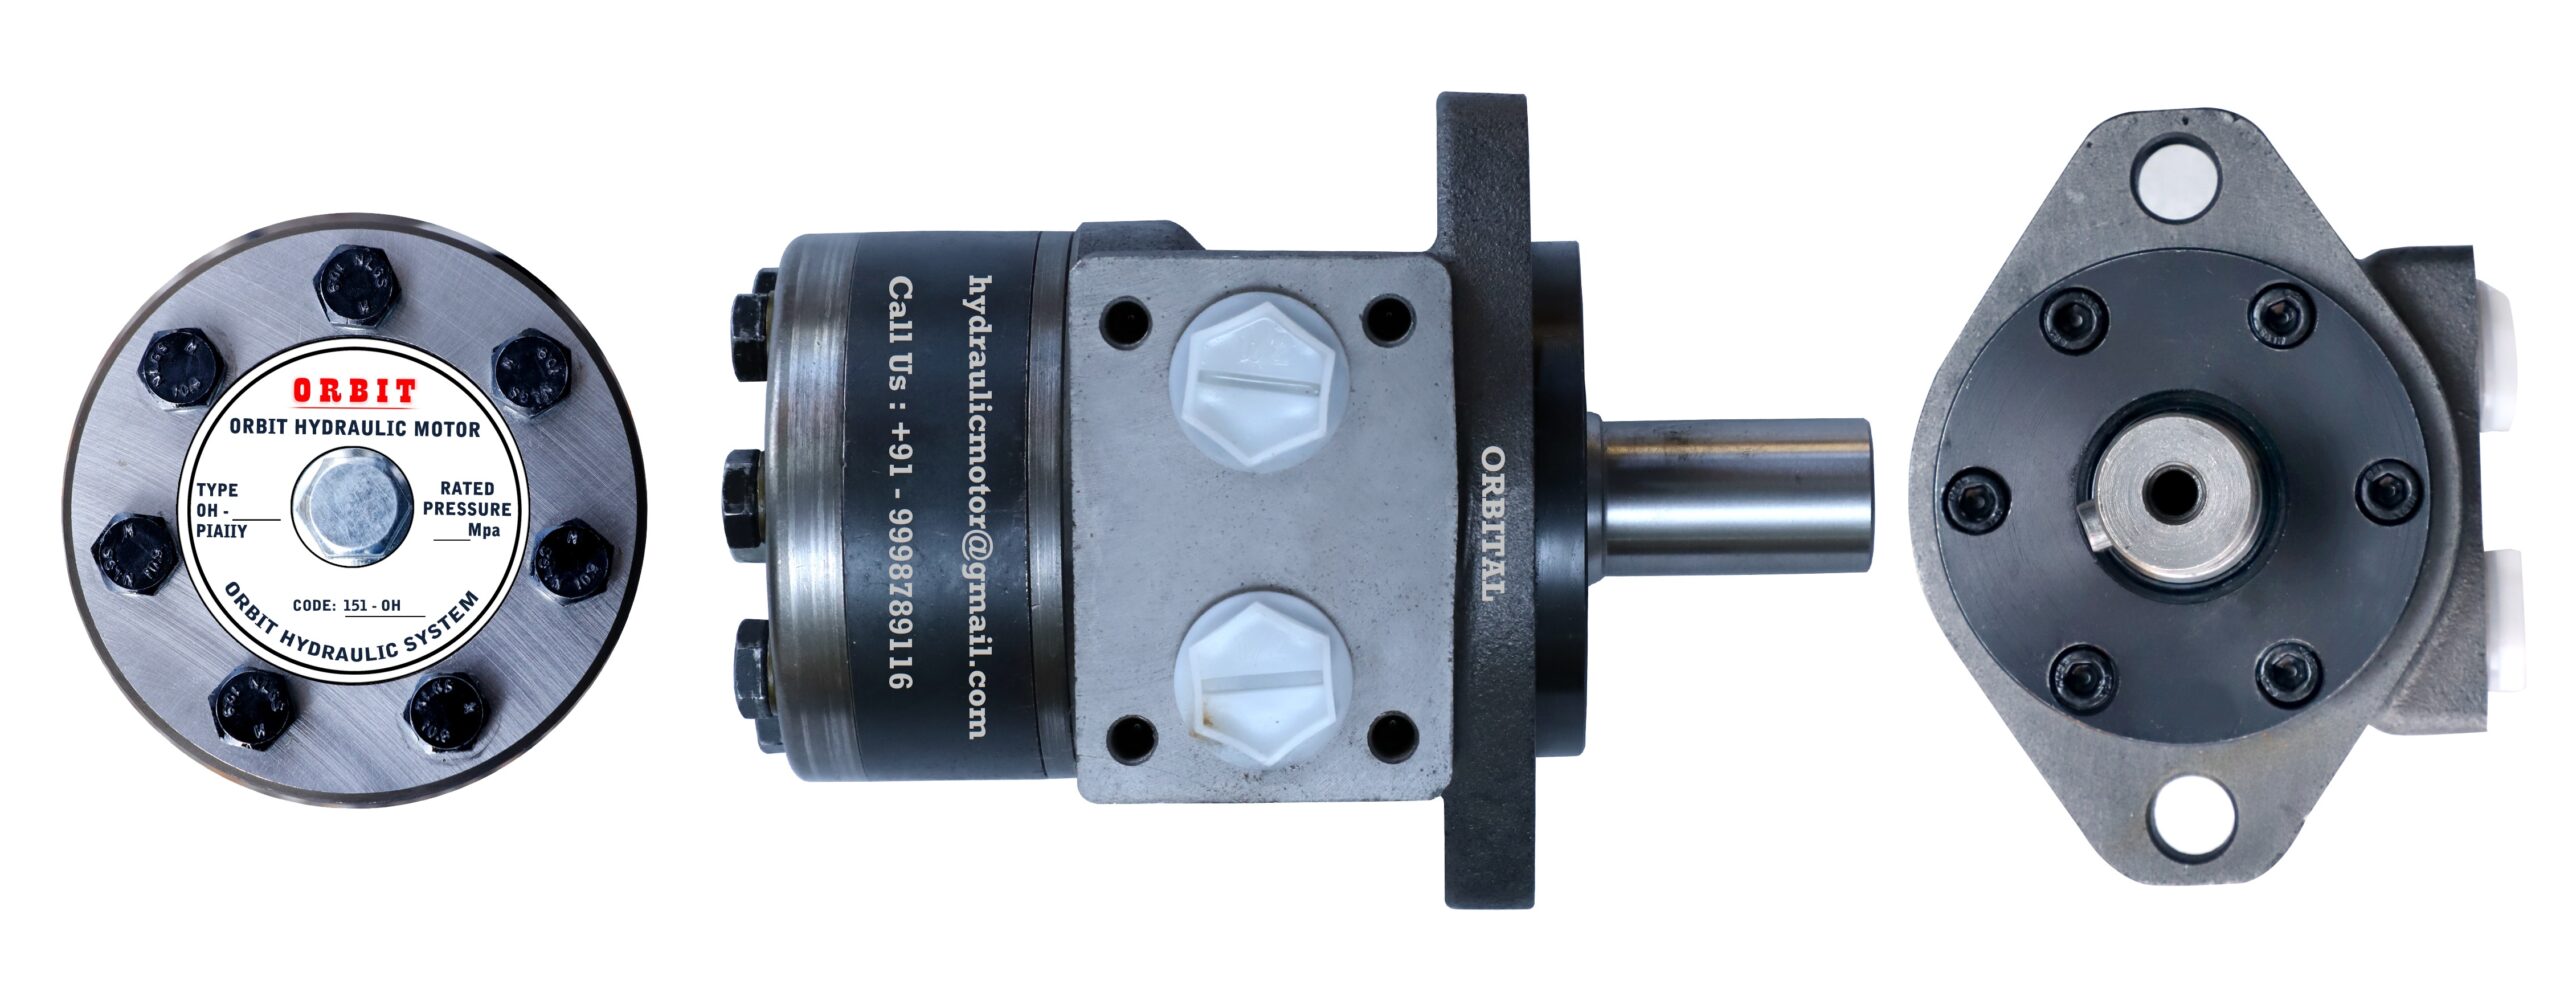 ORBIT OH Hydraulic Motor of OH50, OH80, OH100, OH125, OH160, OH200, OH250, OH315, OH400 ORBIT Hydraulic Motor